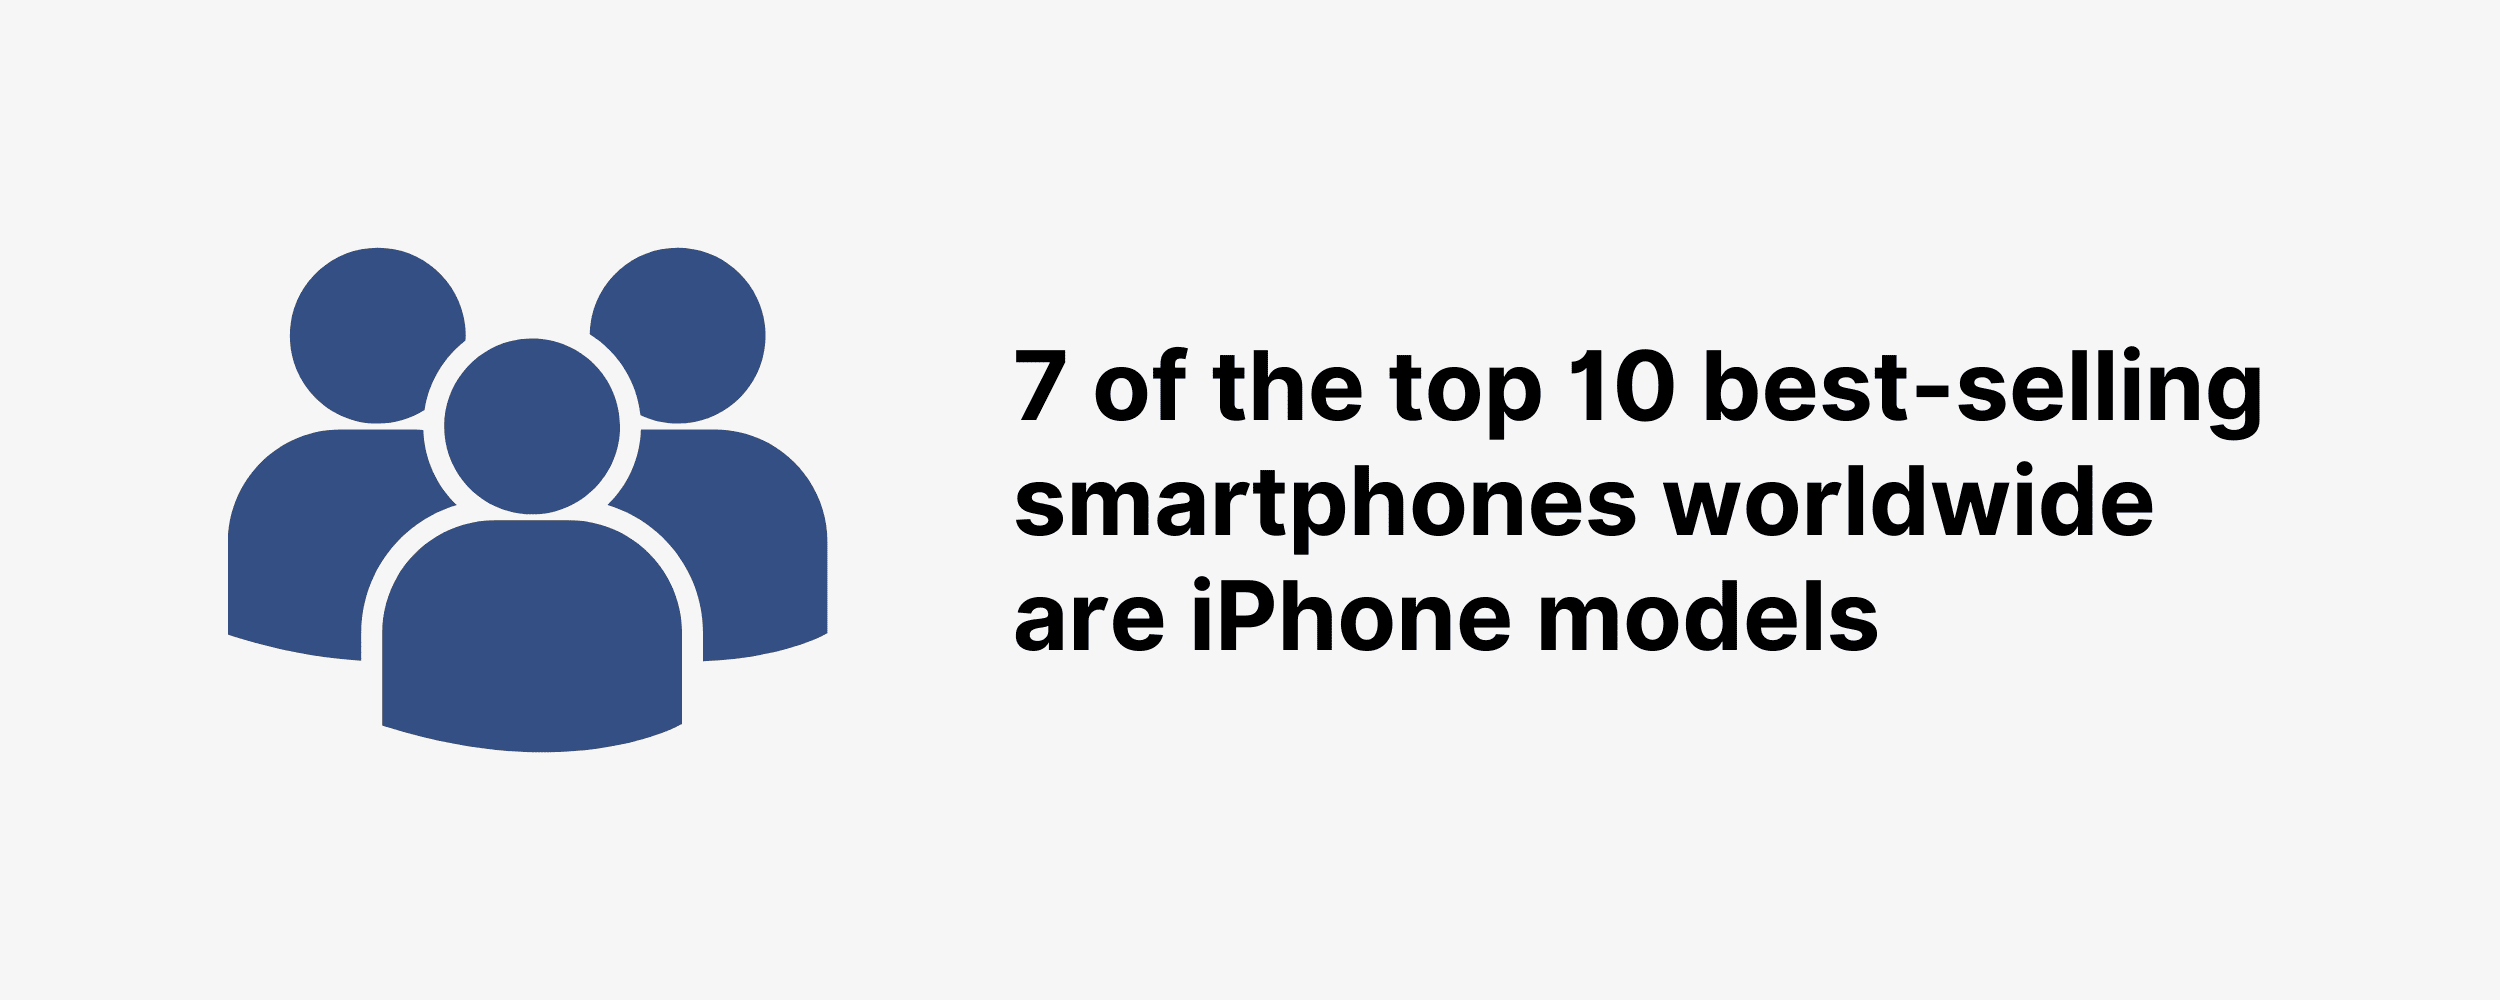 7 of the top 10 best-selling smartphones worldwide are iPhone models